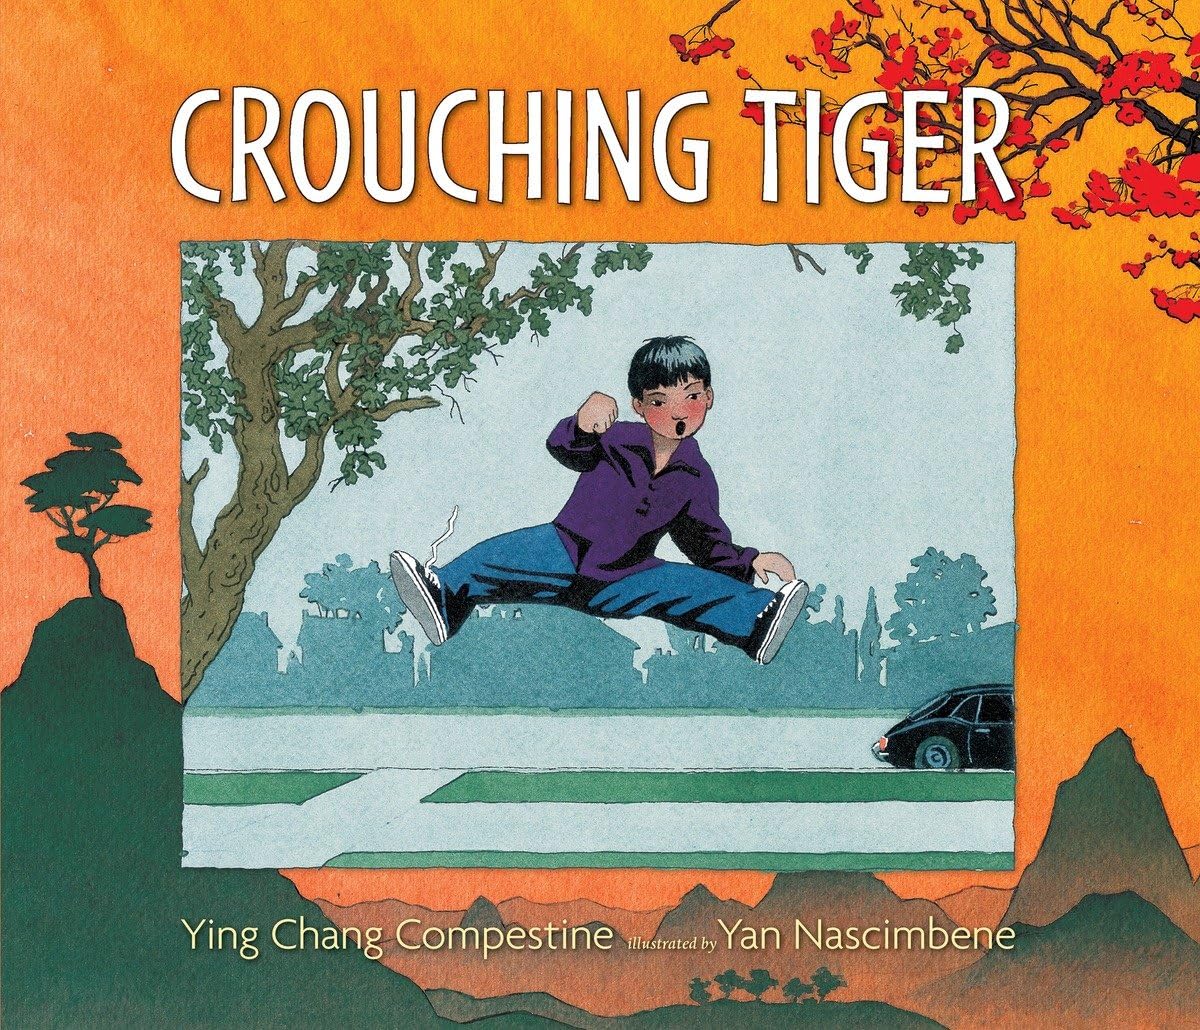 Crouching Tiger Chinese American children's book